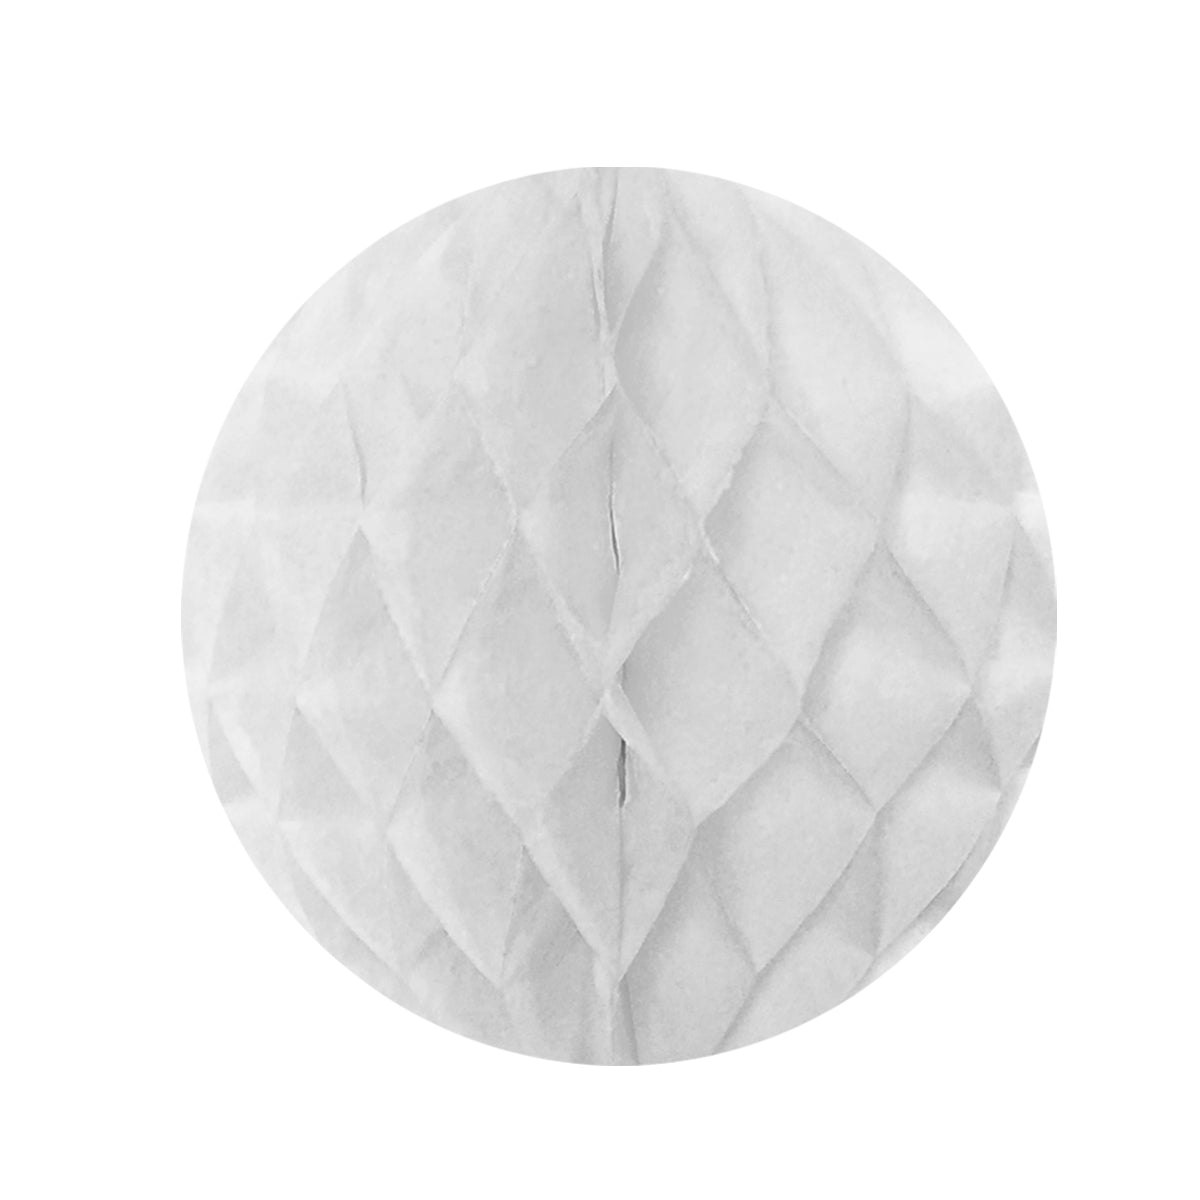 Wrapables 16" Set of 2 Tissue Honeycomb Ball Party Decorations